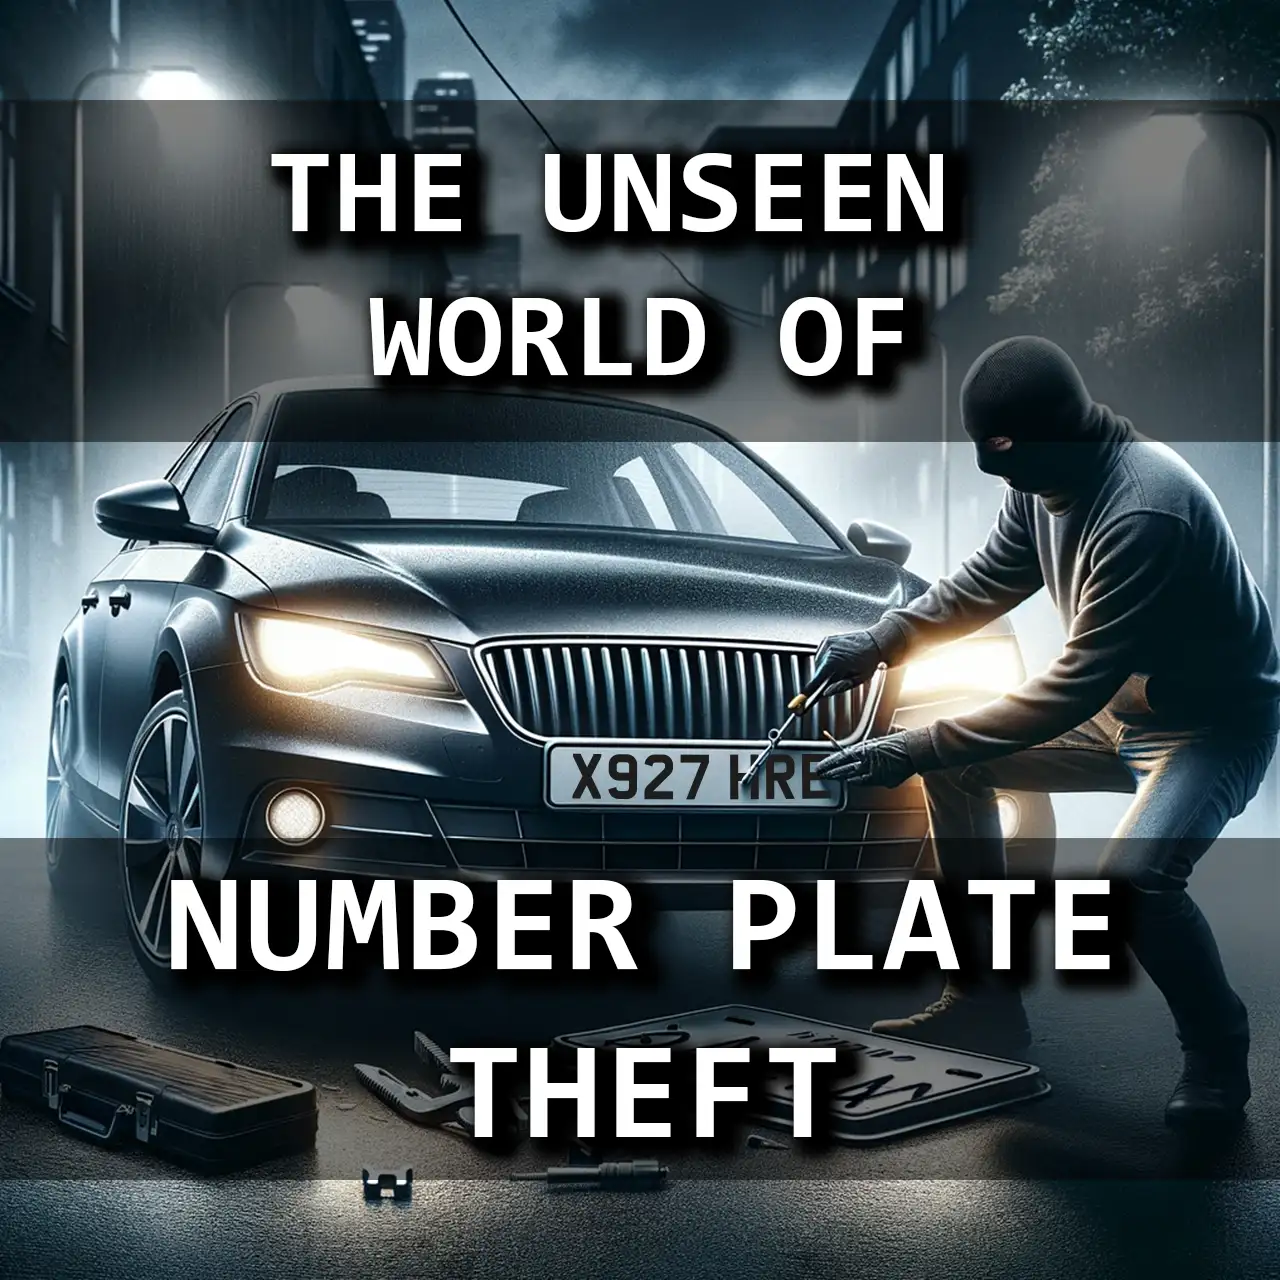 The Unseen World of Number Plate Theft and Its Consequences